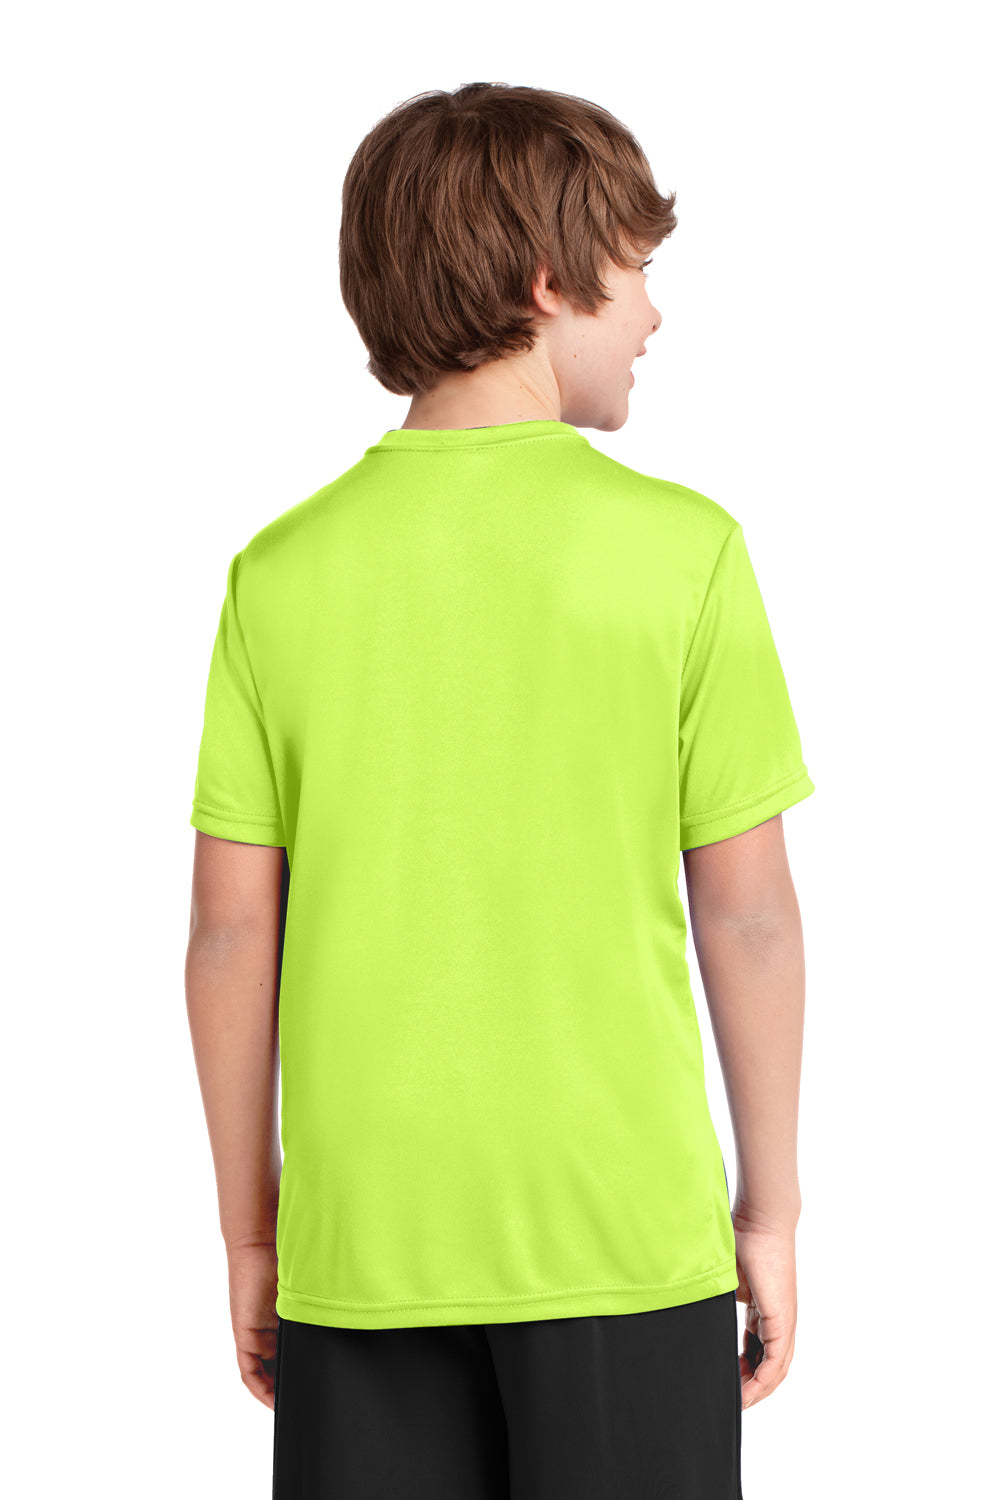 Port & Company PC380Y Youth Dry Zone Performance Moisture Wicking Short Sleeve Crewneck T-Shirt Neon Yellow Back